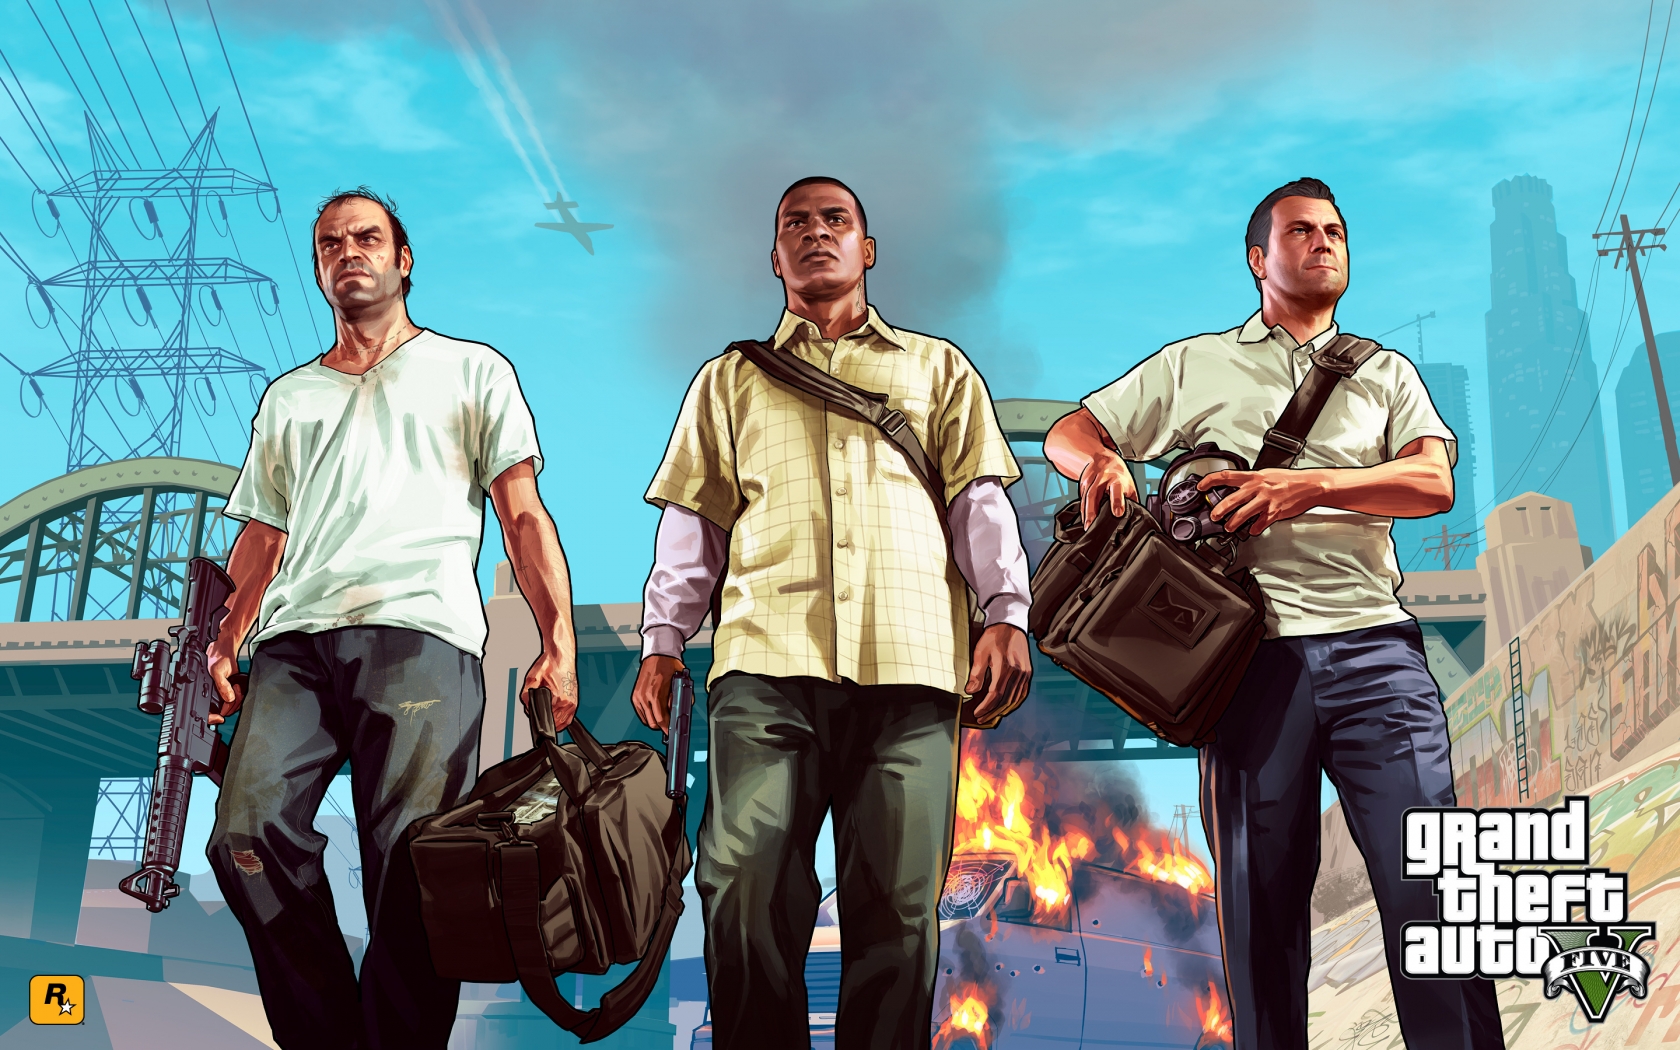 Gta 5 Main Characters for 1680 x 1050 widescreen resolution